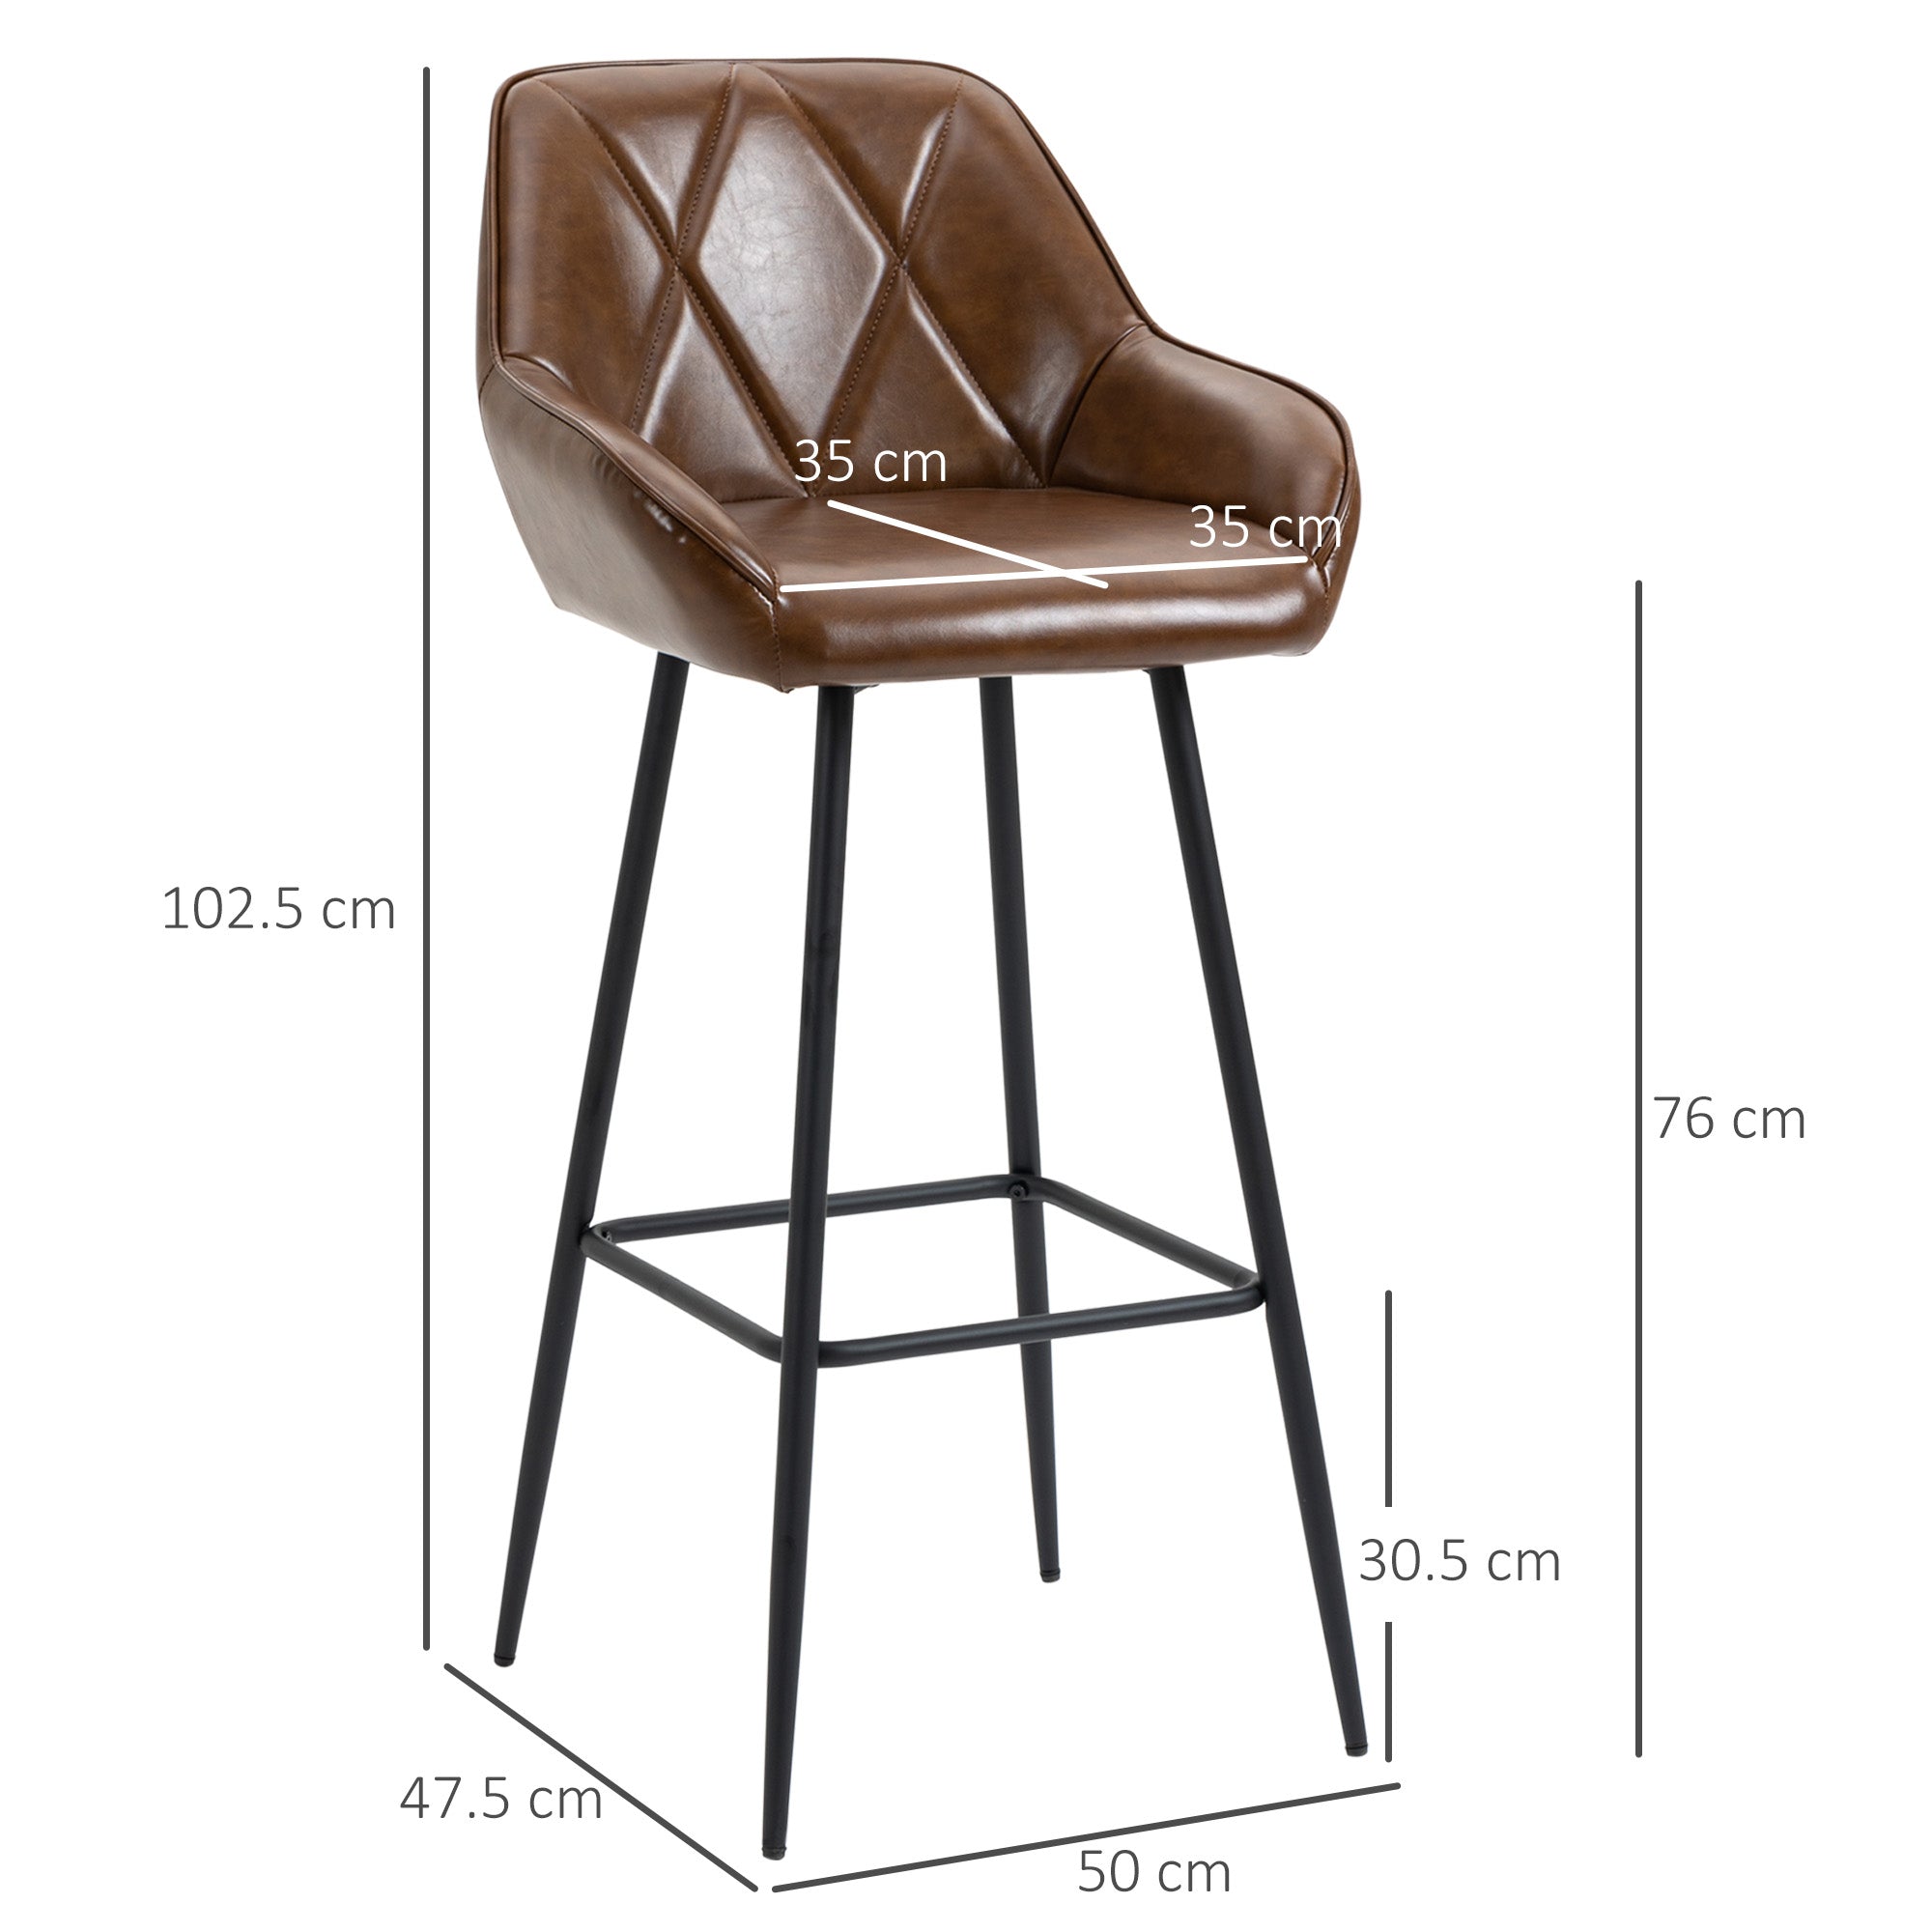 Retro Bar Stools Set of 2, Breakfast Bar Chairs with Footrest, Kitchen Stools with Backs and Steel Legs, for Dining Area and Home Bar, Brown  AOSOM   